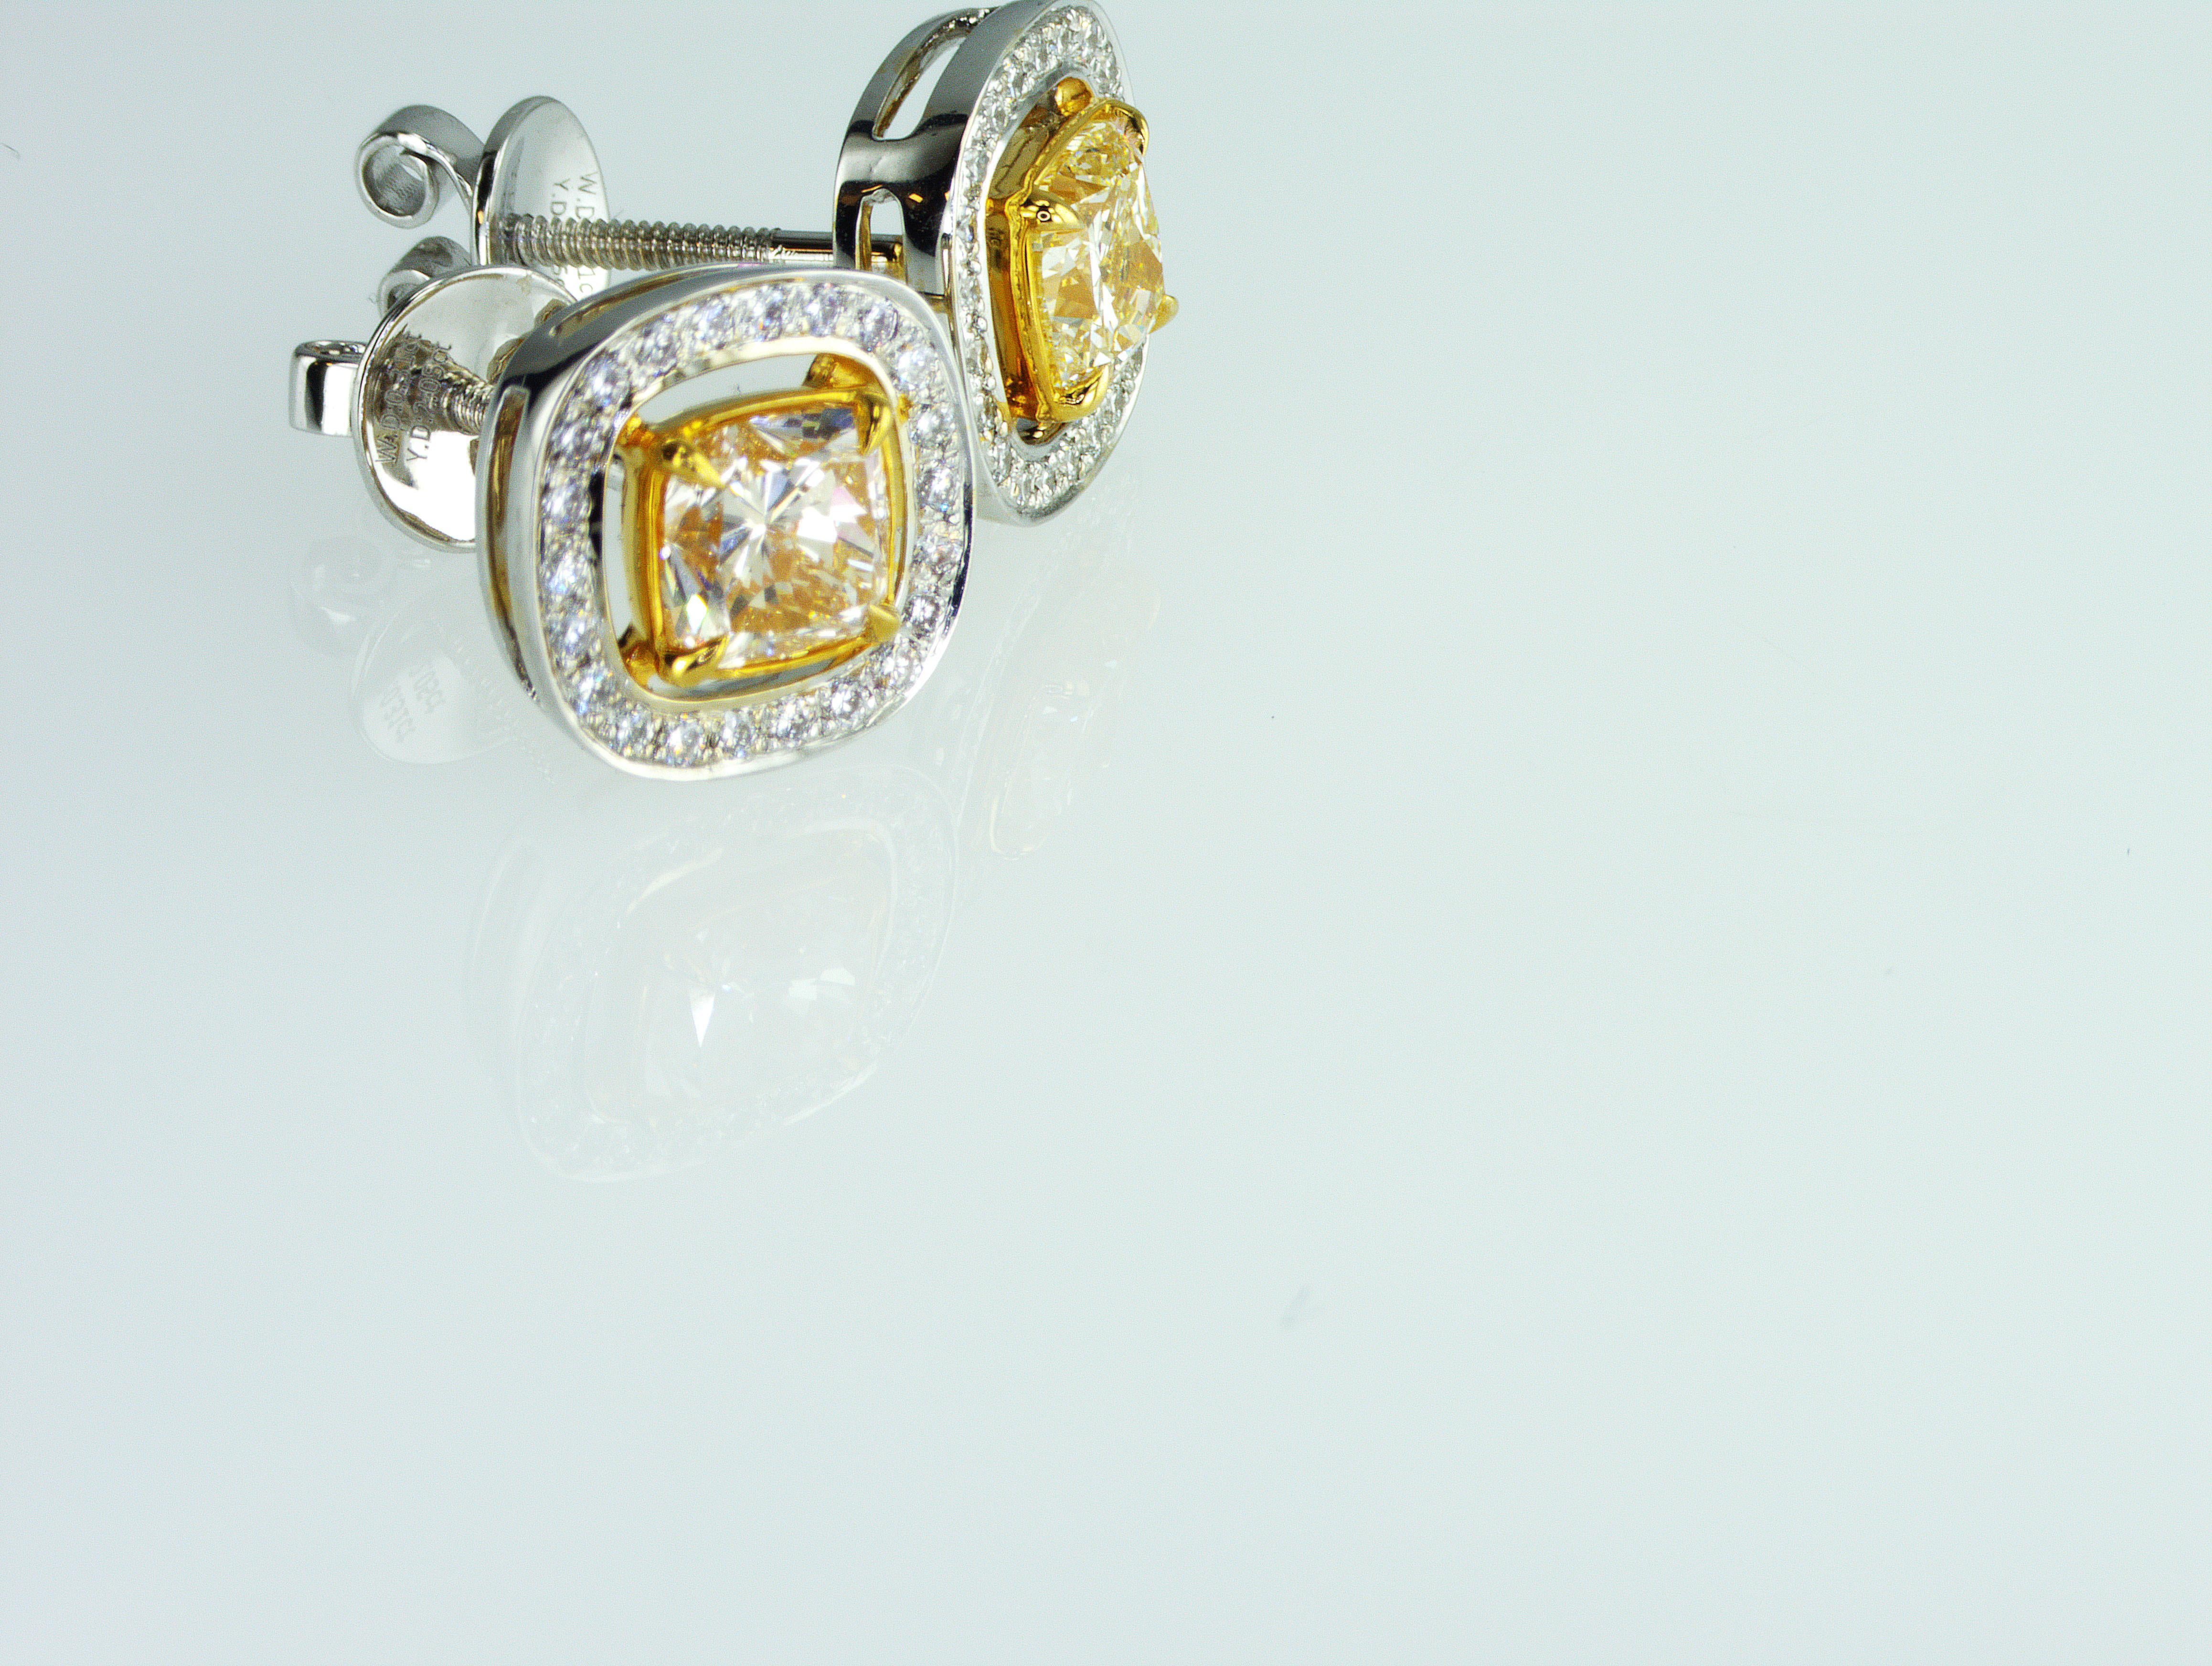 We are natural diamond production company located in Dubai.
This gorgeous IDL certified 2.05 carat Yellow Diamonds Studs Earrings you can get for a very good price. Total weight of natural diamonds is 2.36 carat. All our diamonds, jewelry and